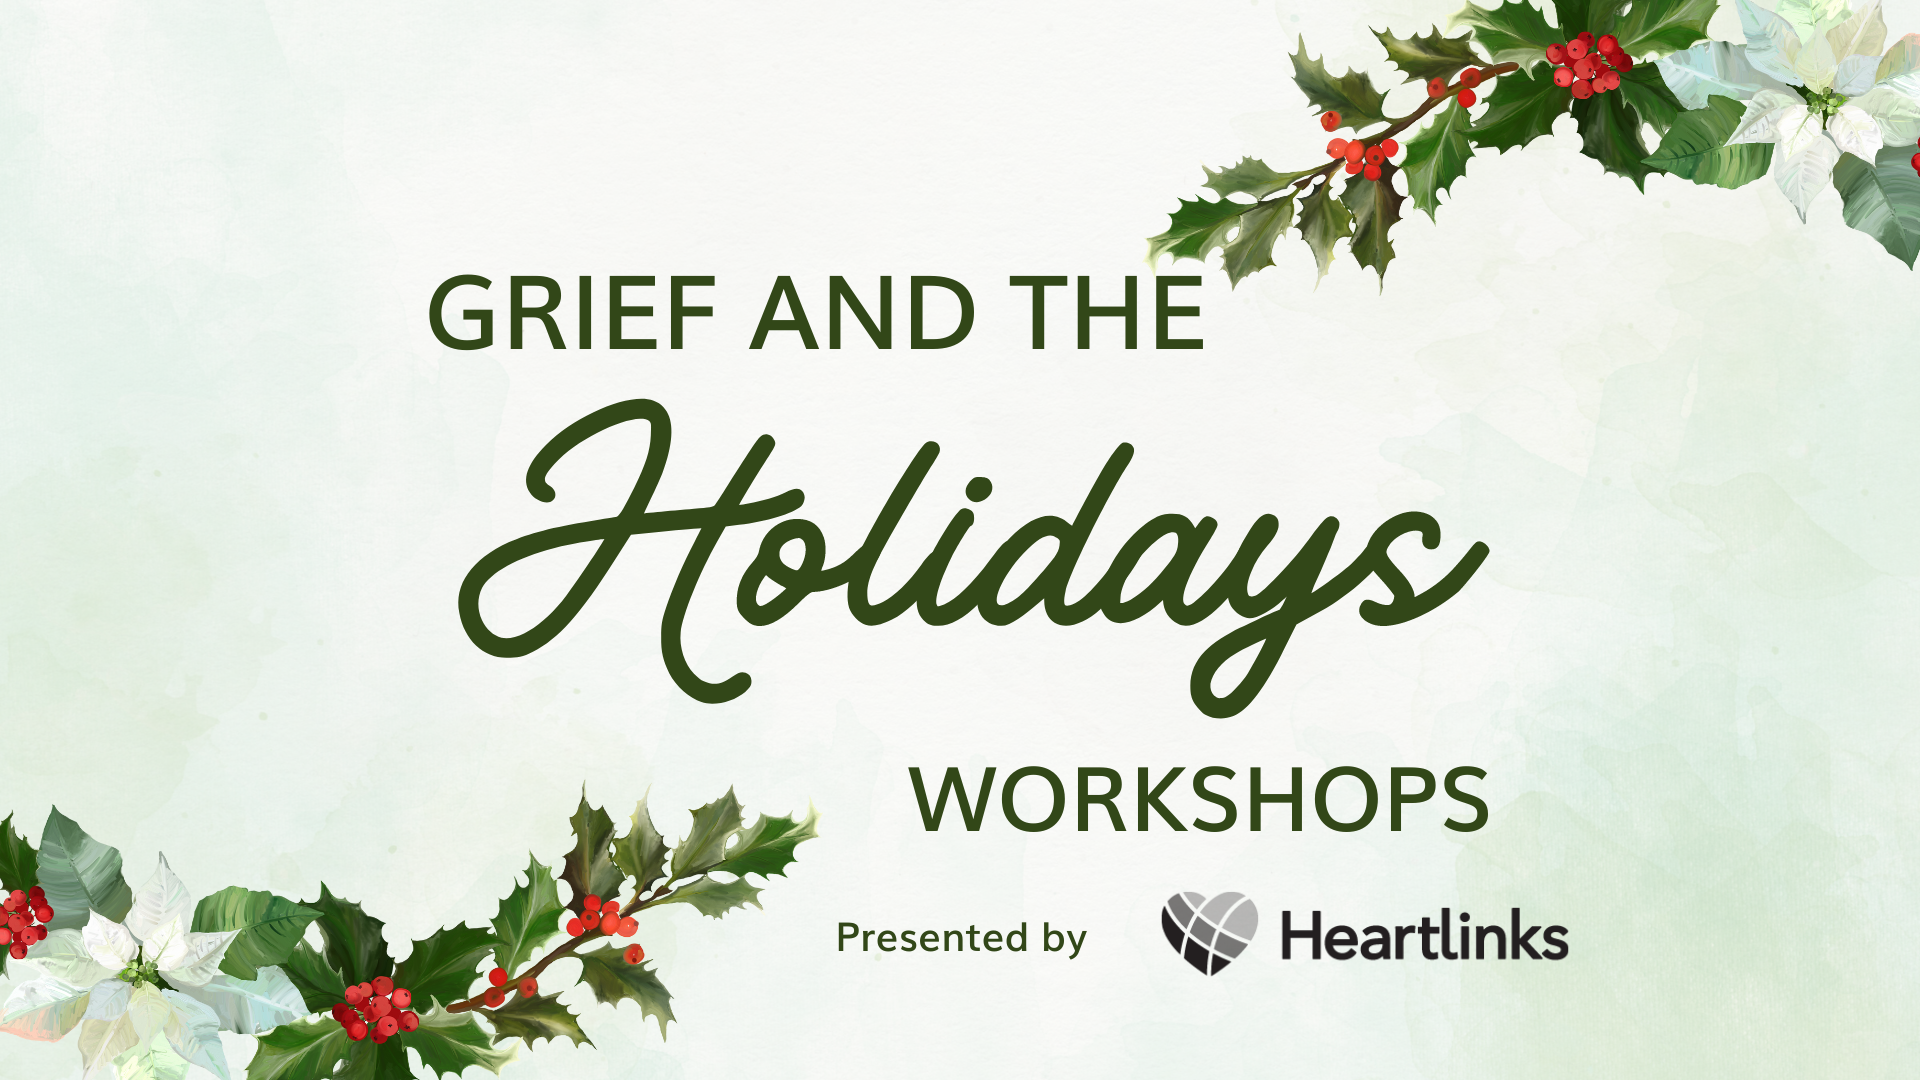 Grief and the Holidays Workshops Presented by Heartlinks